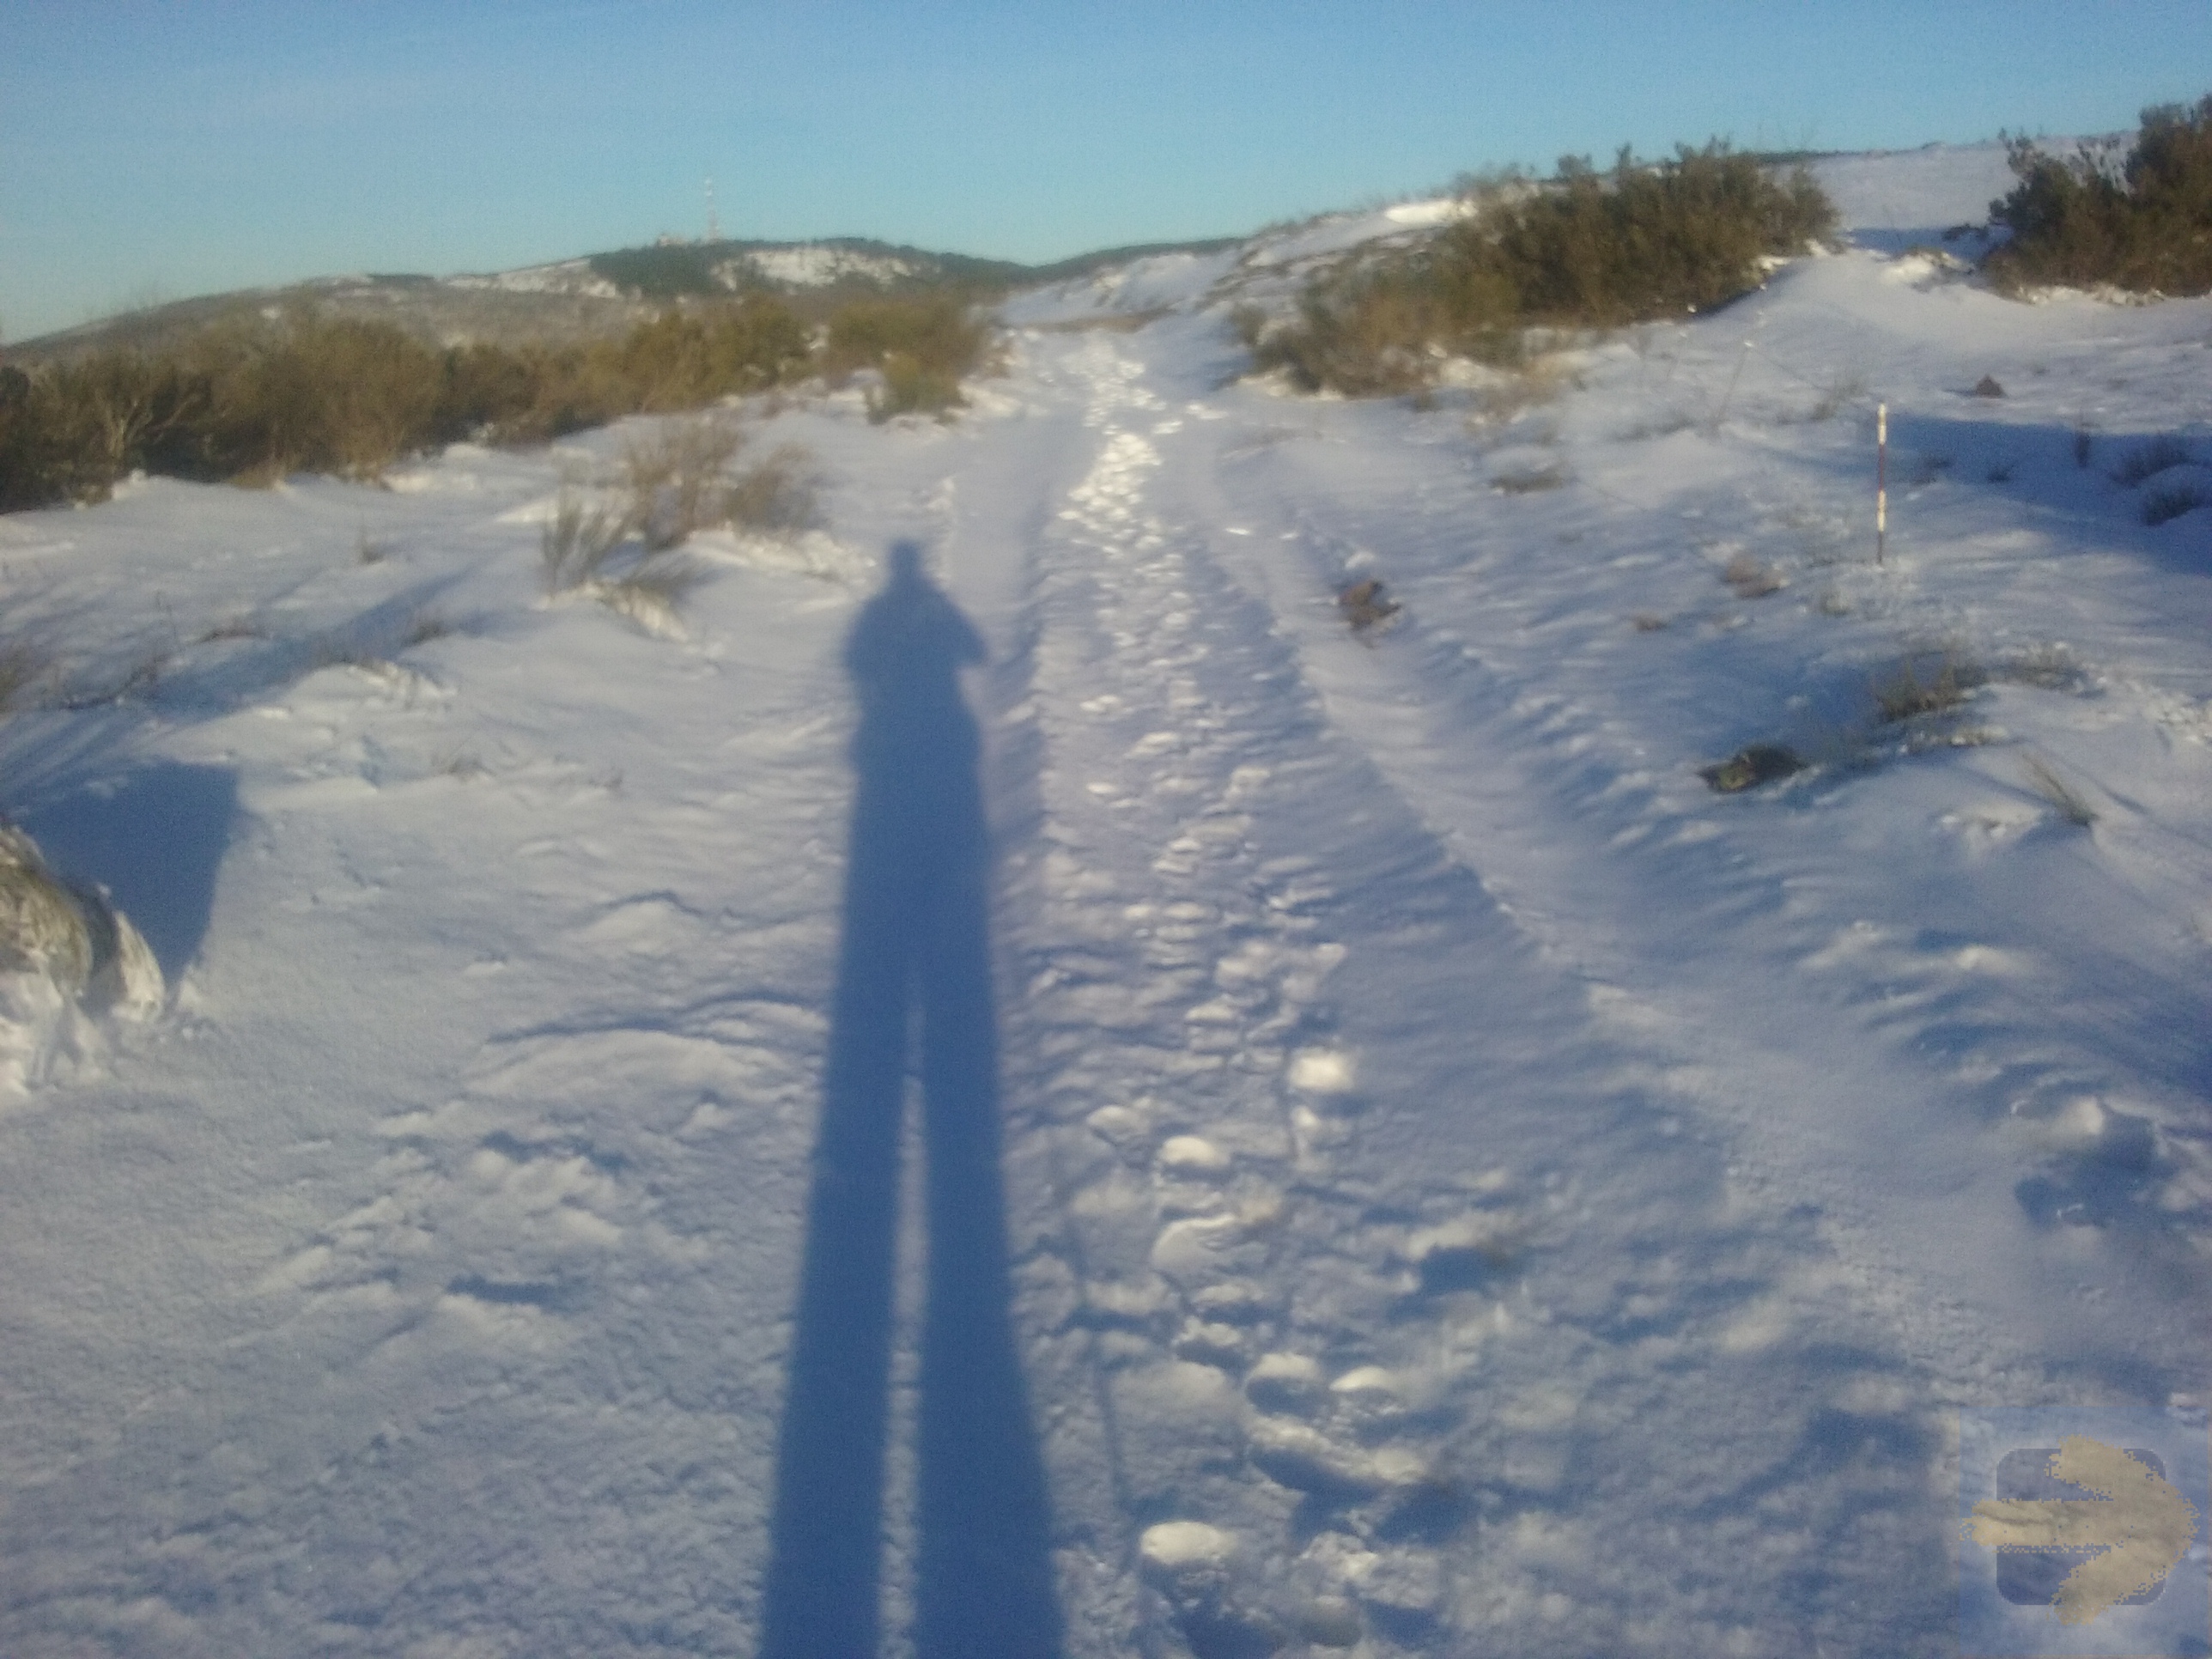 Self portrait in the snow today 1 March at Manjarin